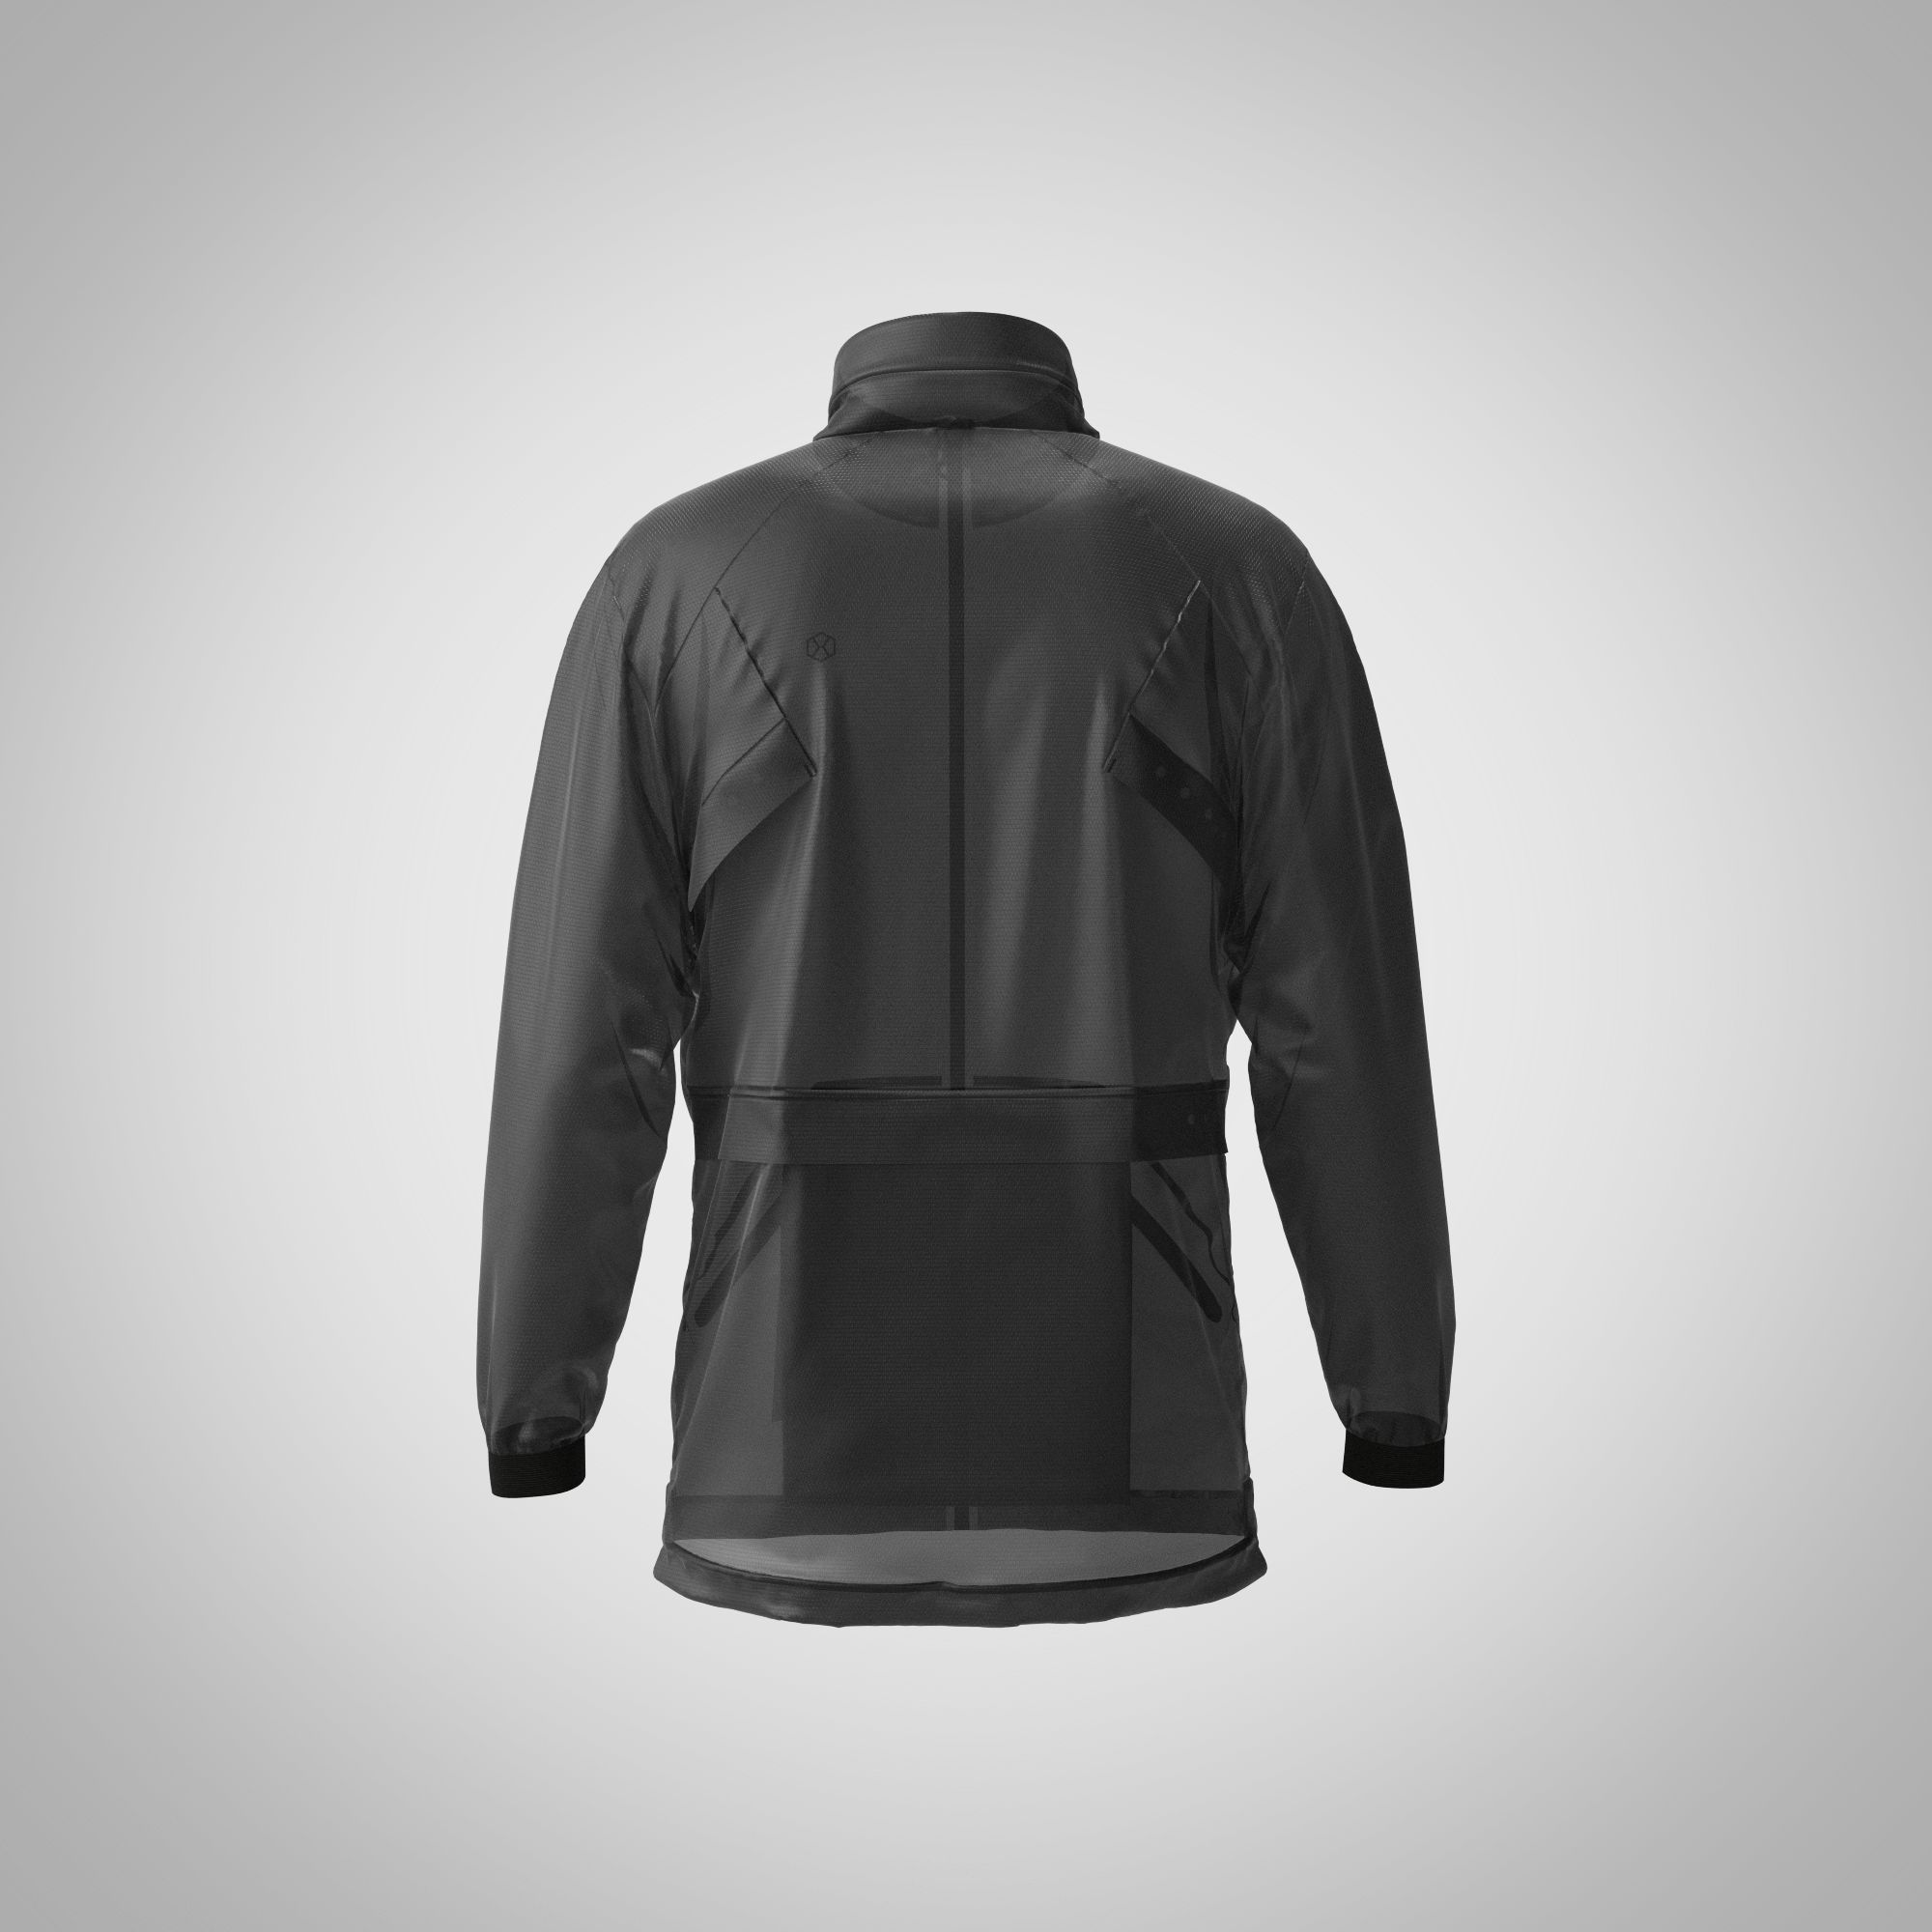 The Nomad(e) Jacket In Black by Graphene-X #06